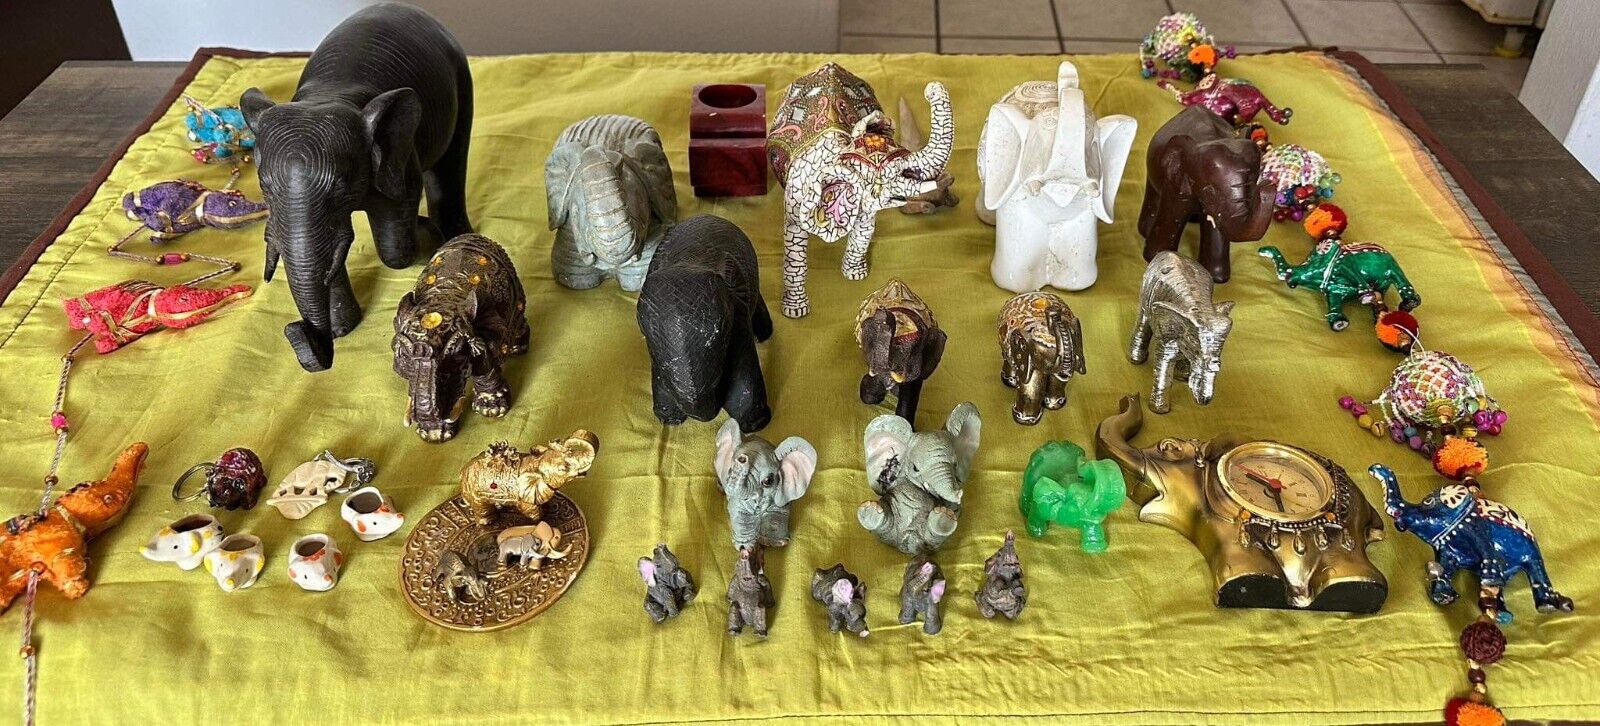 Unique Elephant Collection: Wood, Resin, Metal, Stone, Ceramic & More